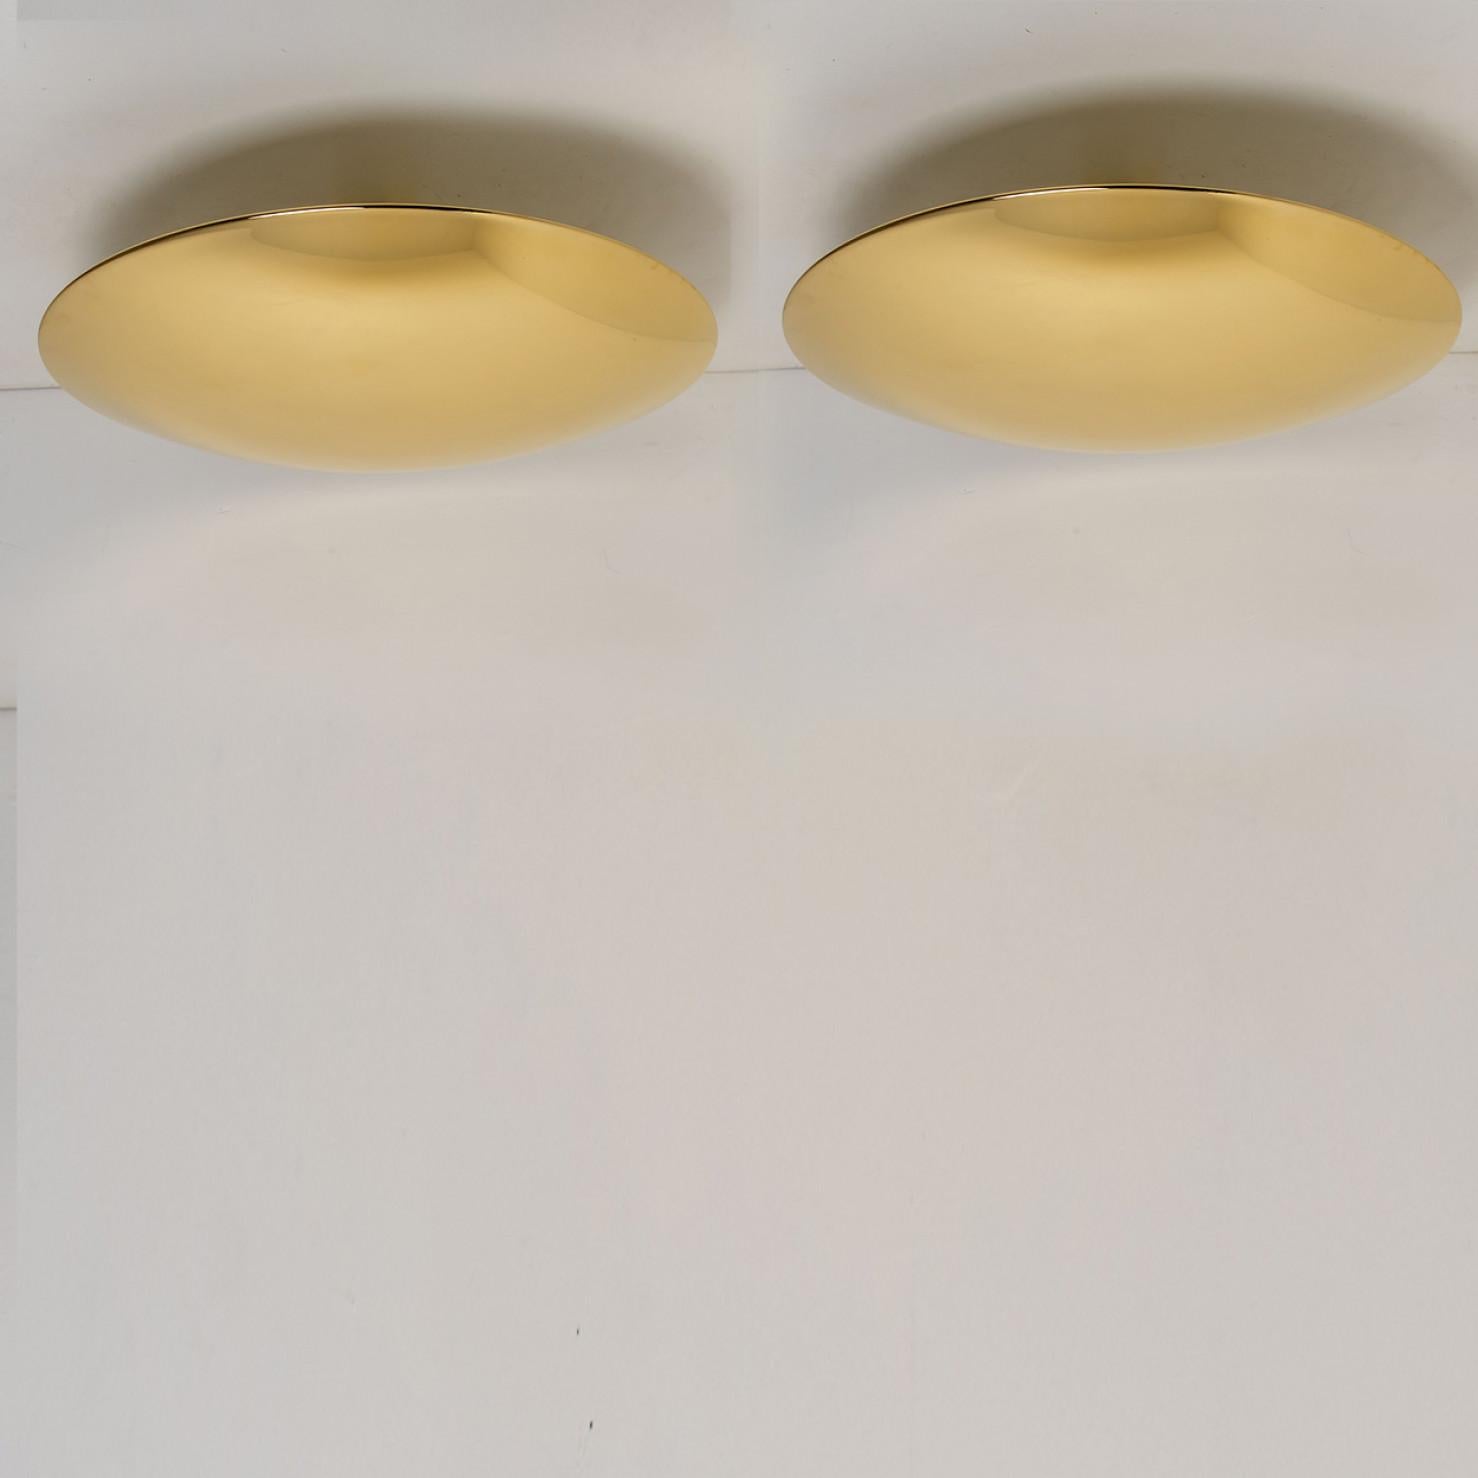 1 of the 2 Florian Schulz Brass Flush Mount Ceiling / Wall Lights For Sale 2